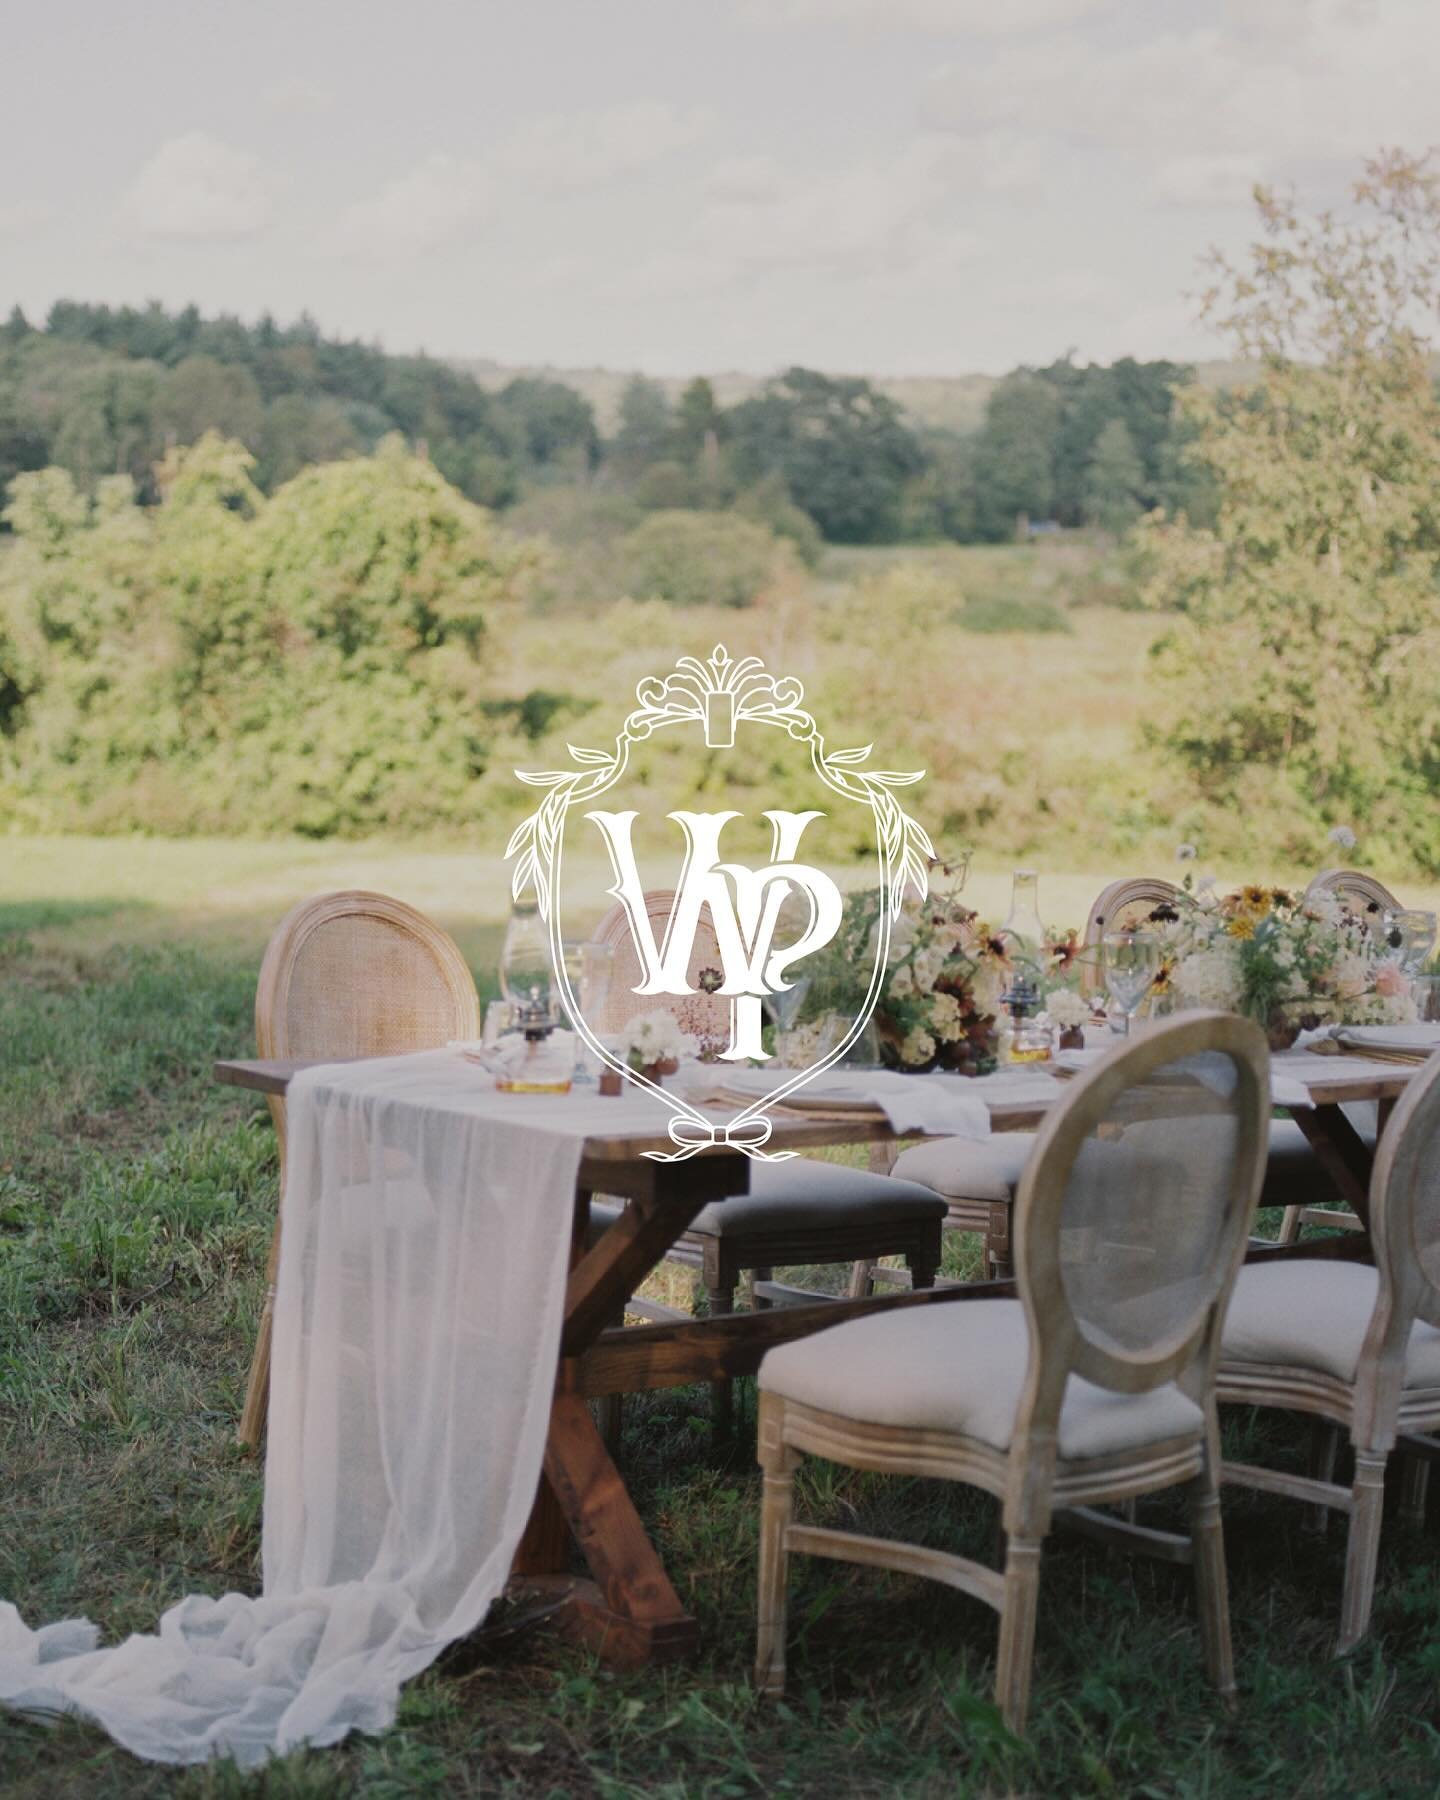 Introducing the brand of Willow Point&mdash;a soon-to-come charming event venue tailored to host unforgettable weddings &amp; celebrations with 28-acres of breathtaking lakefront views, ample indoor &amp; outdoor space, and an exquisitely custom-desi